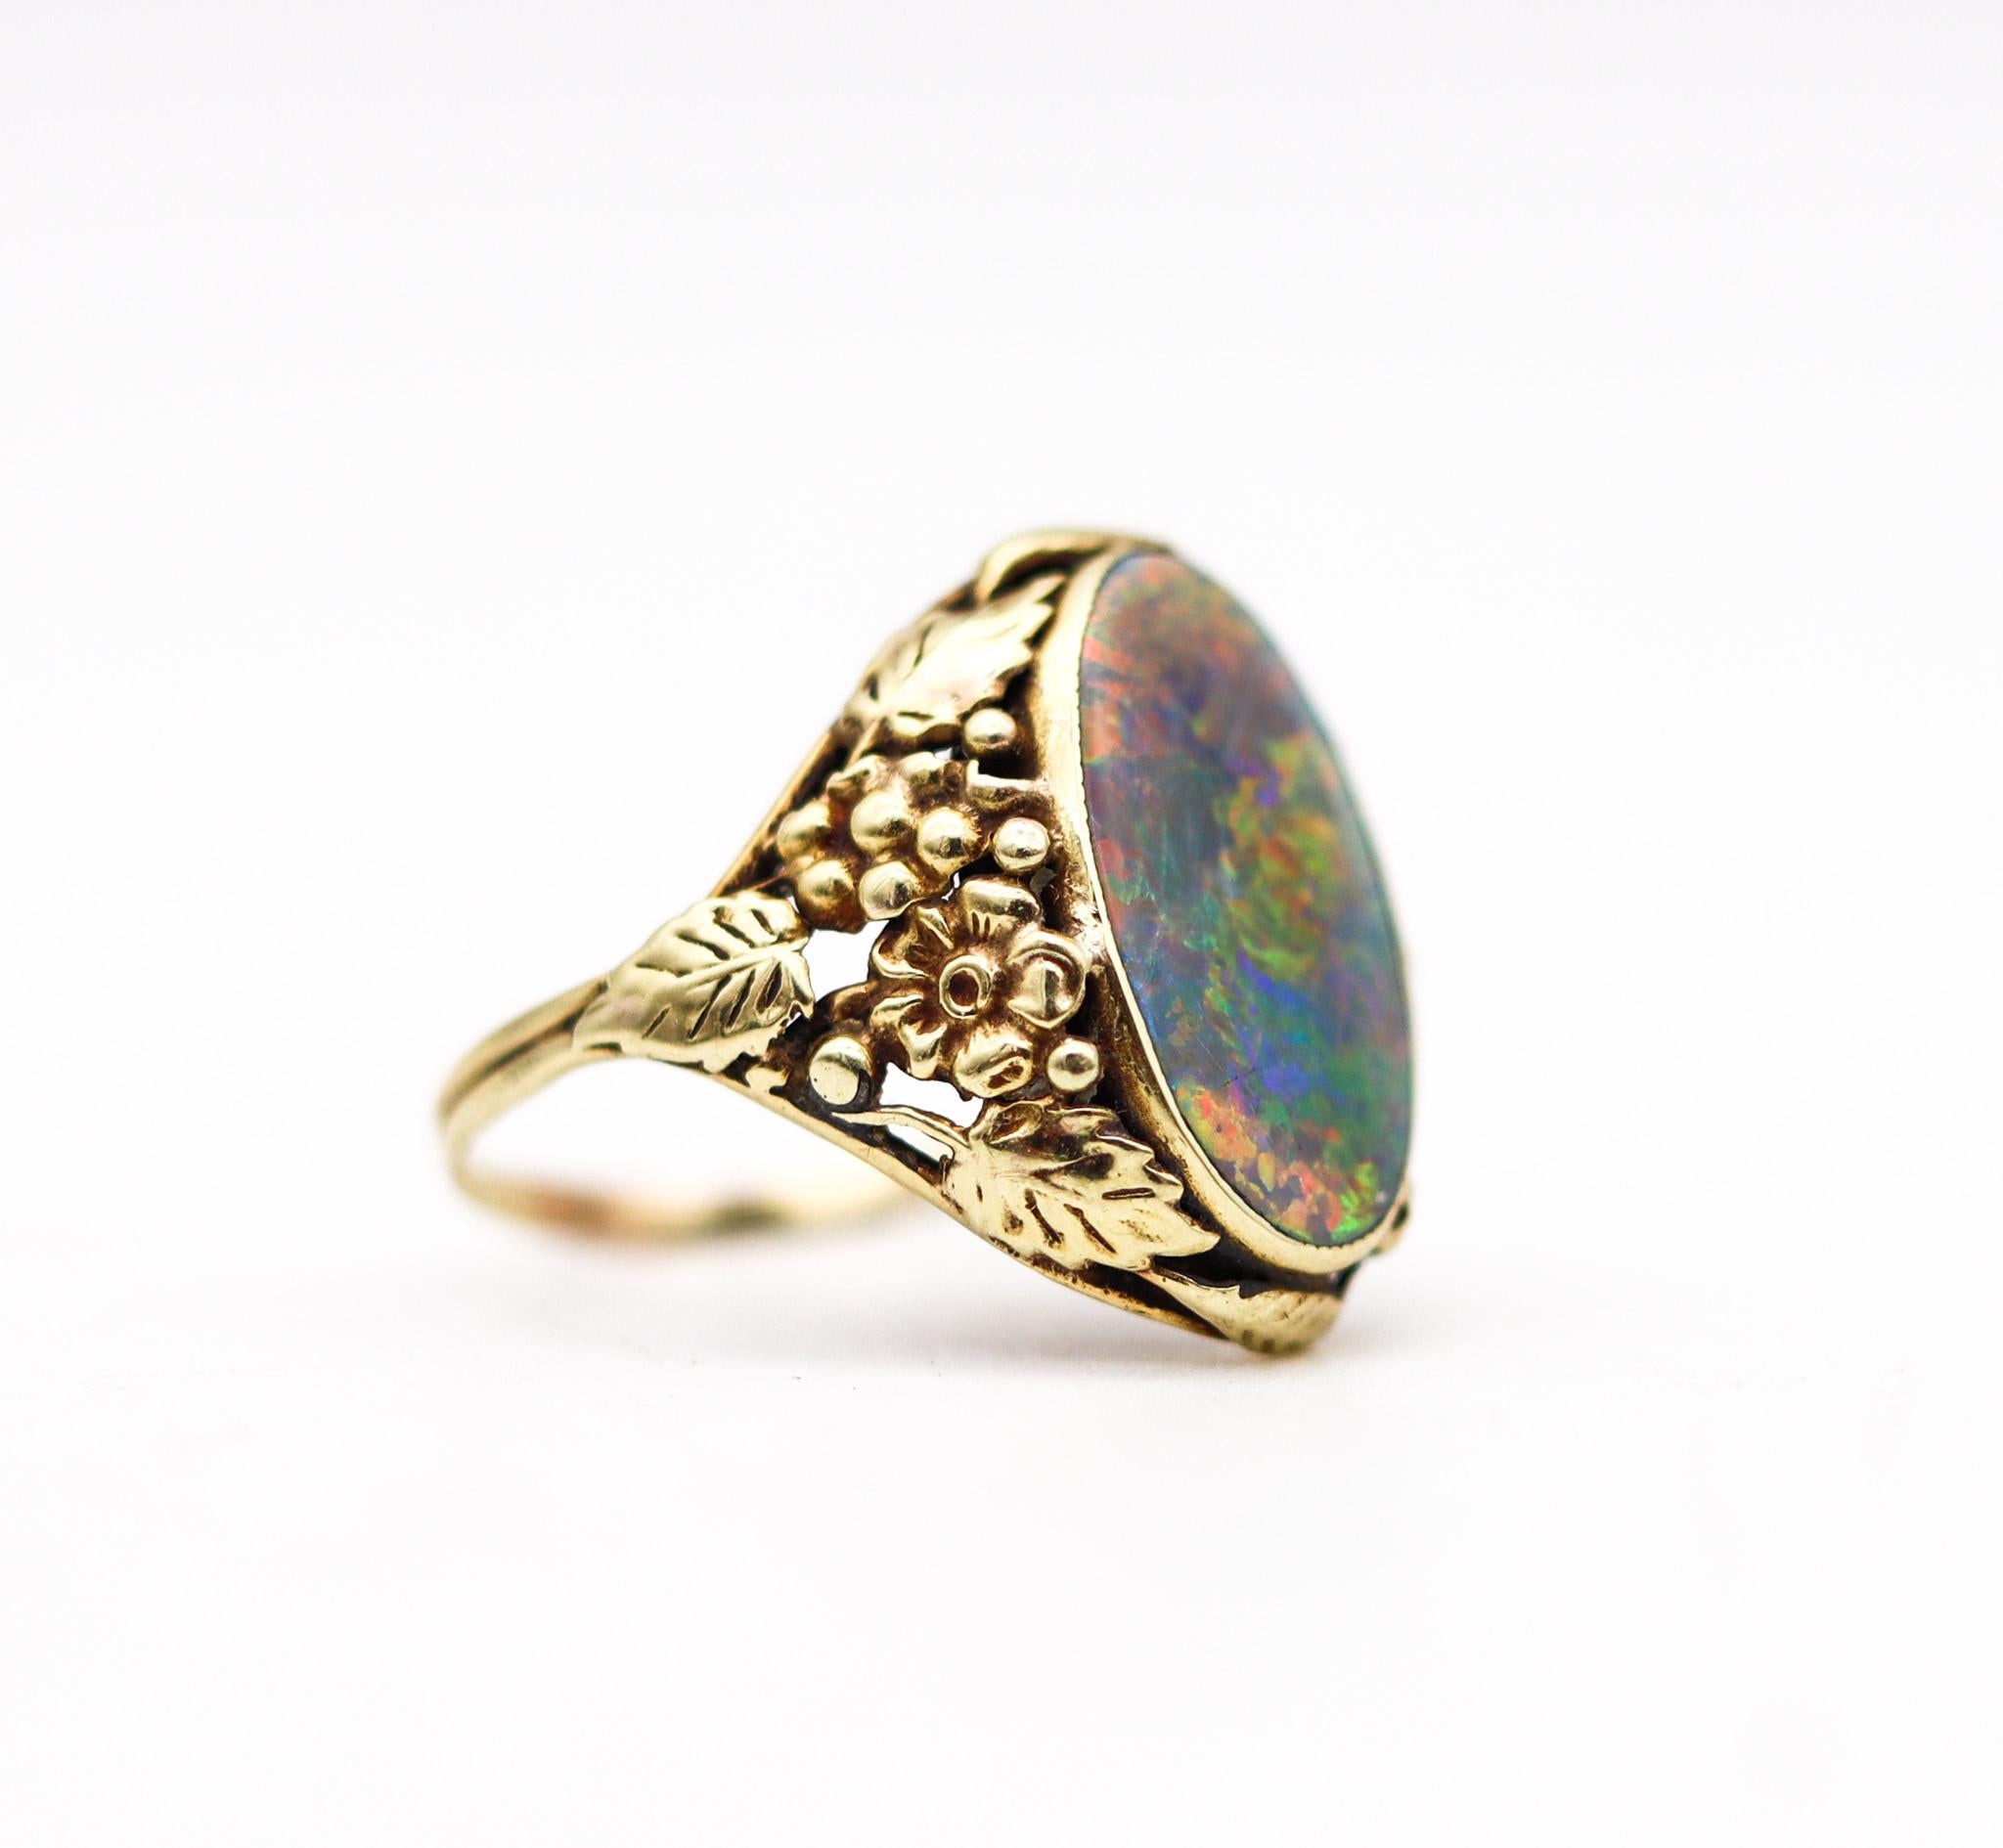 Cabochon American 1895 Art Nouveau Ring In 14Kt Yellow Gold With 3.42 Cts Black Opal